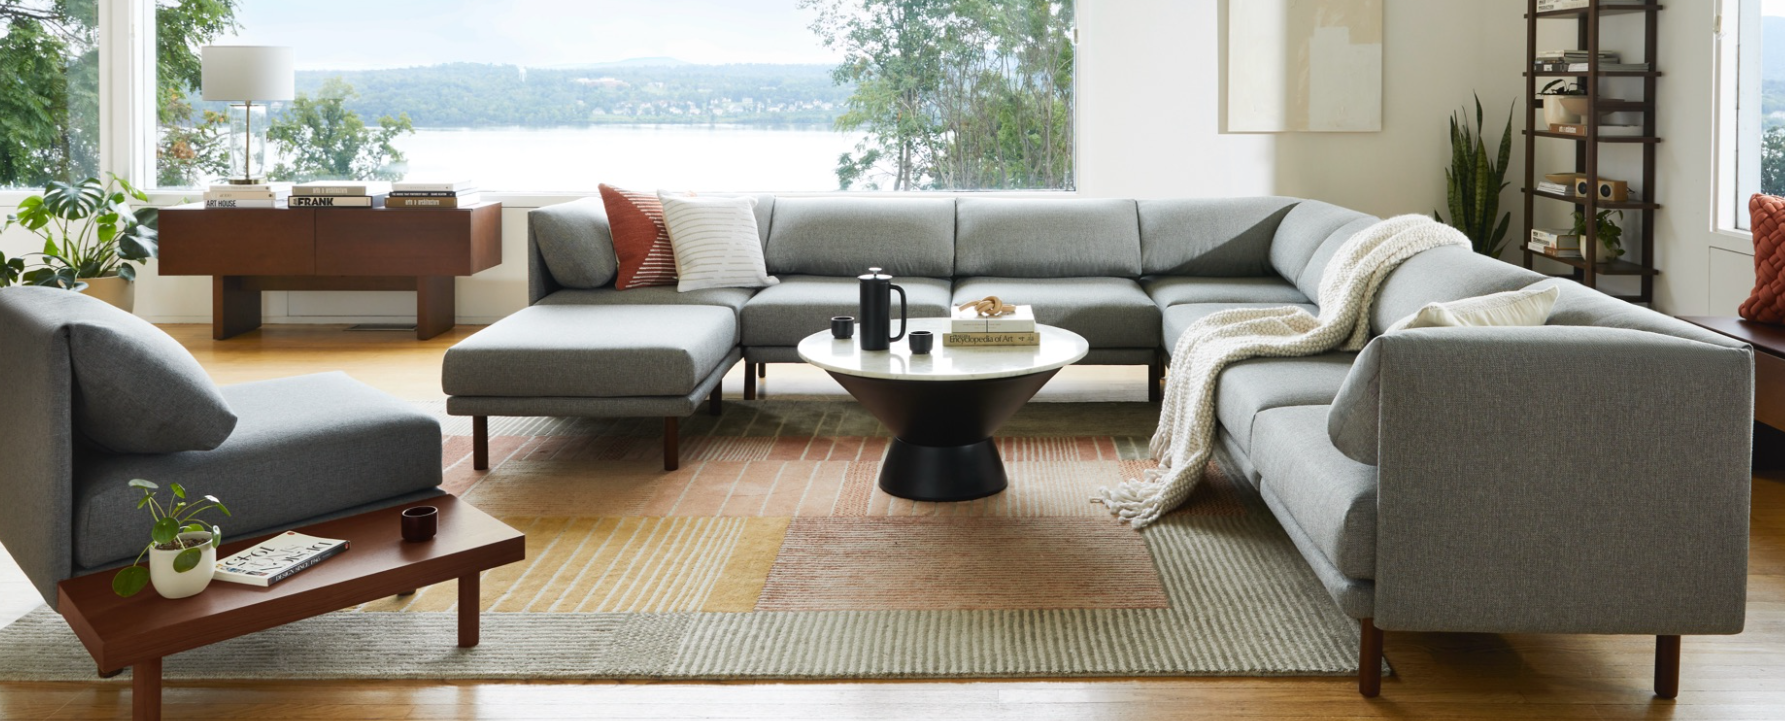 Image of The Burrow Sofa, a cozy and inviting piece of furniture perfect for lounging and relaxing